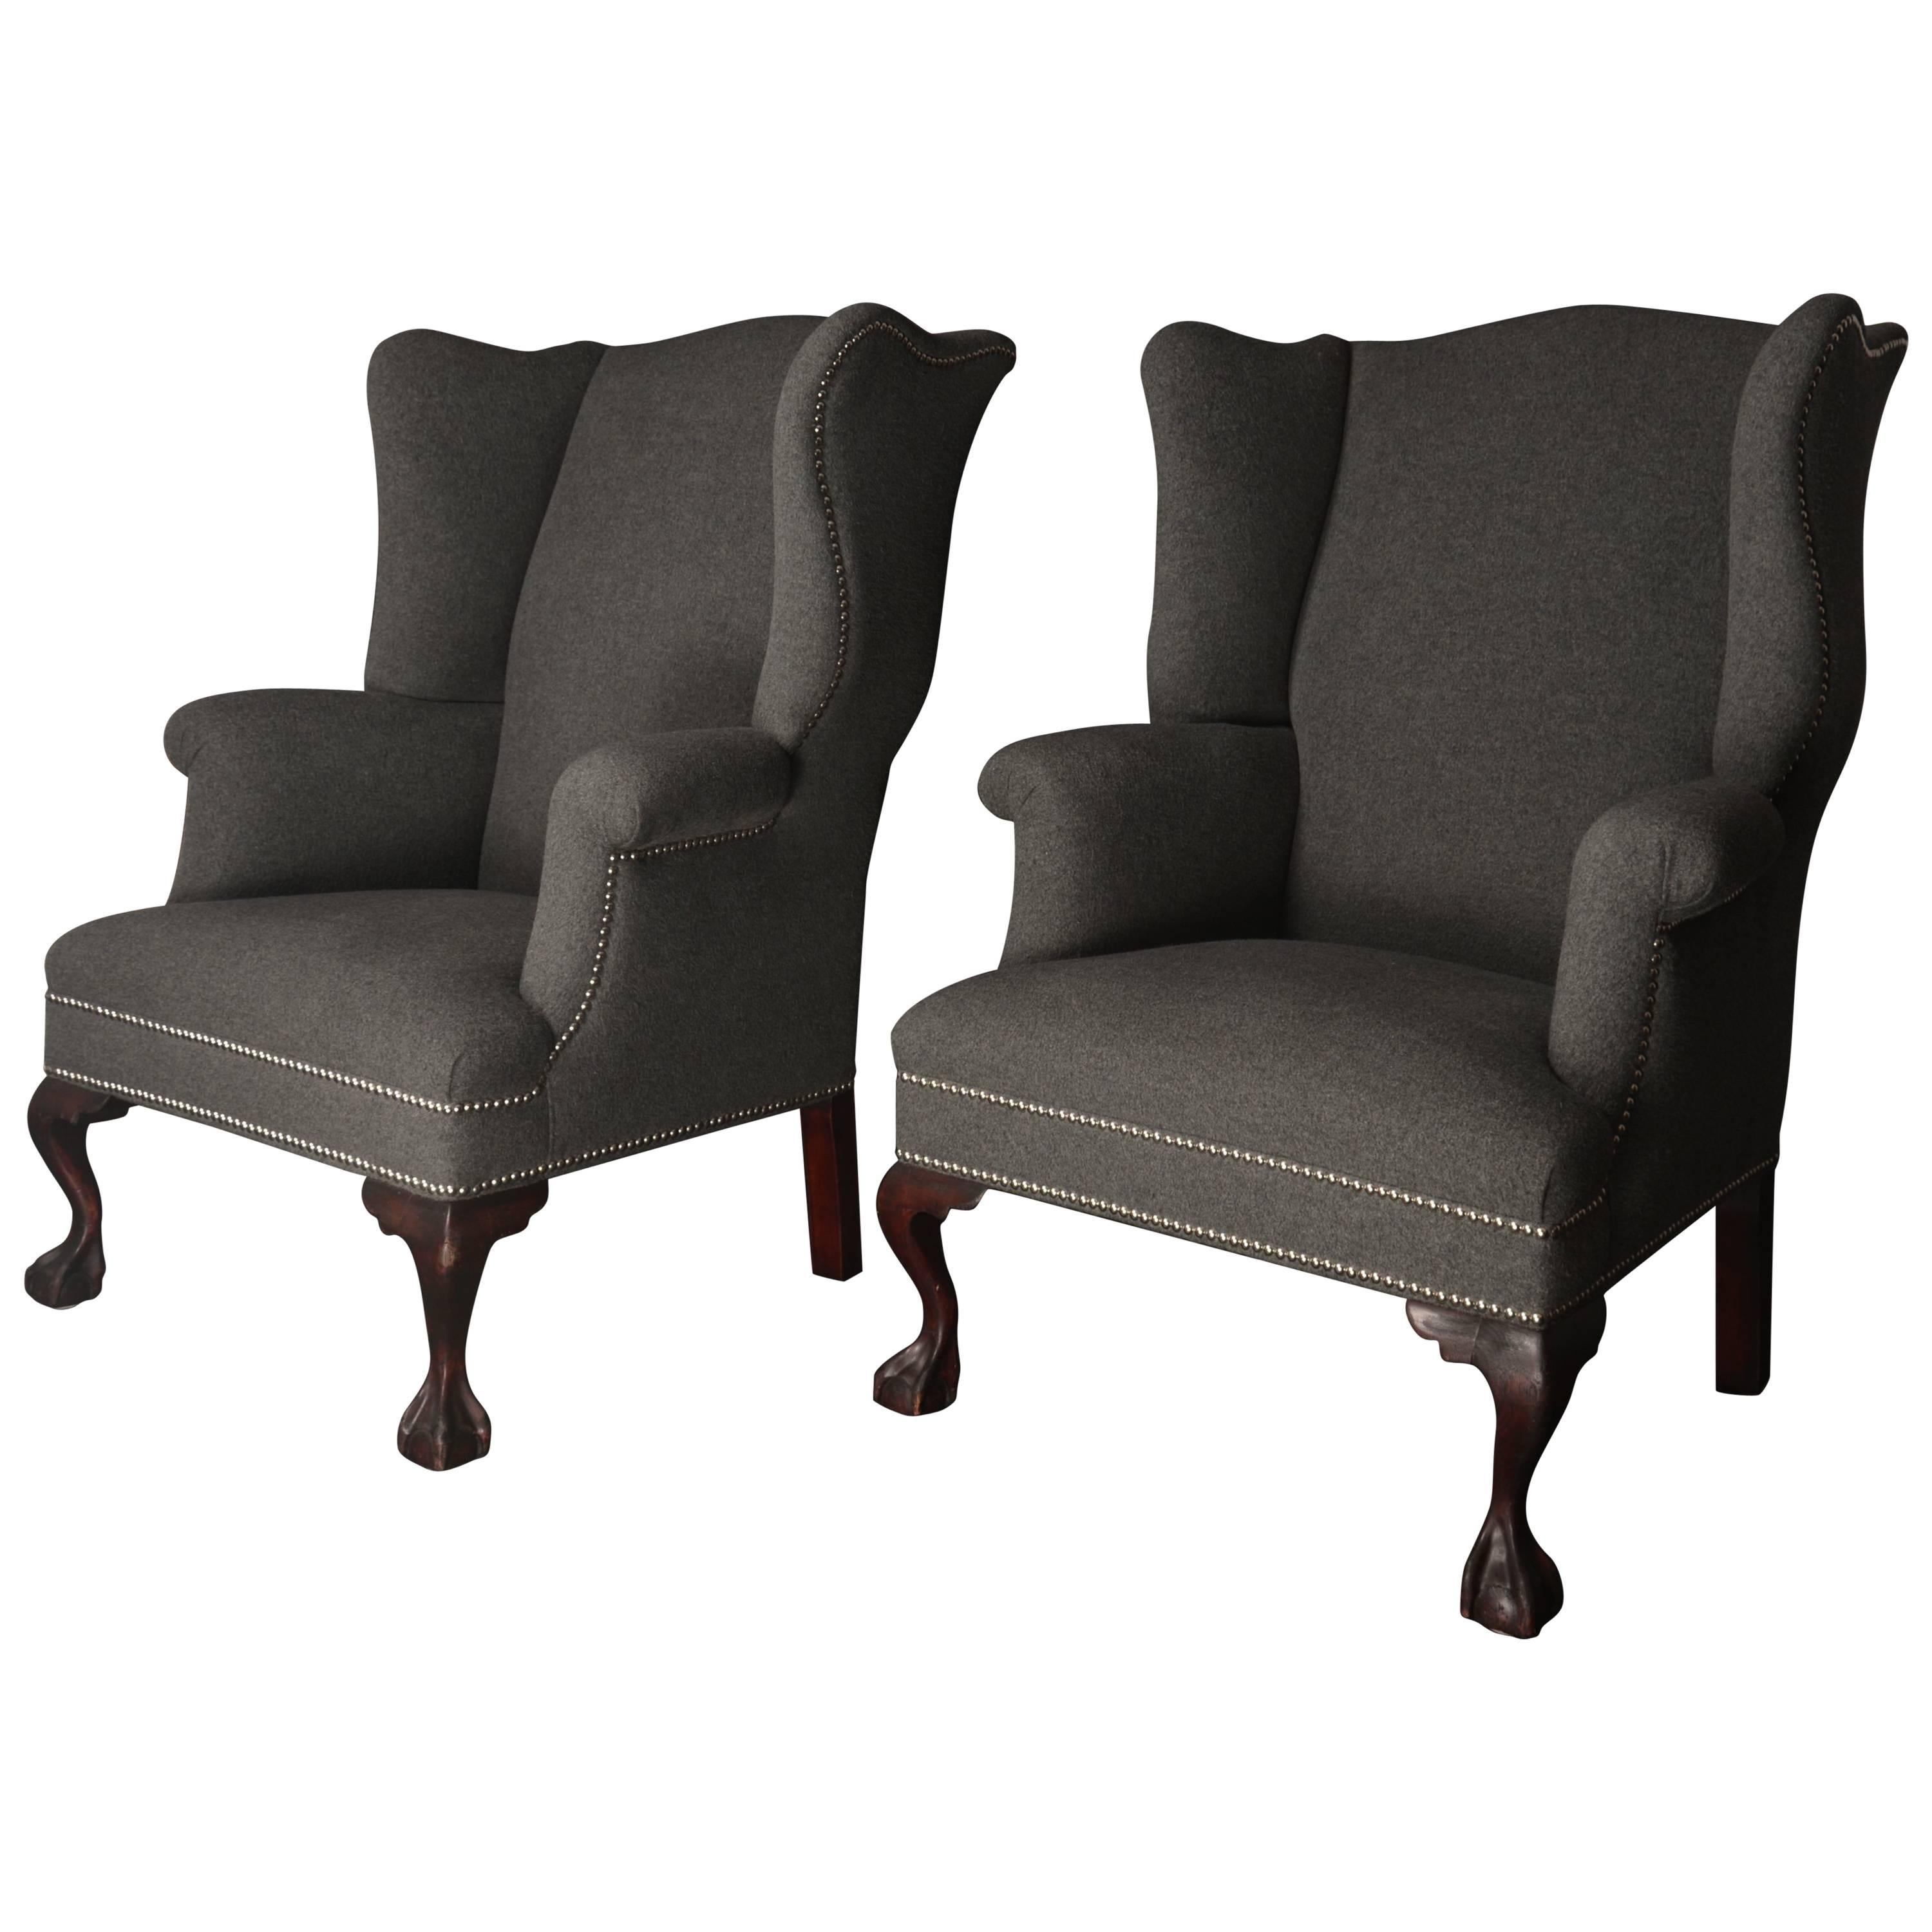 19th Century Wingback Chairs in Cashmere/Wool Blend For Sale